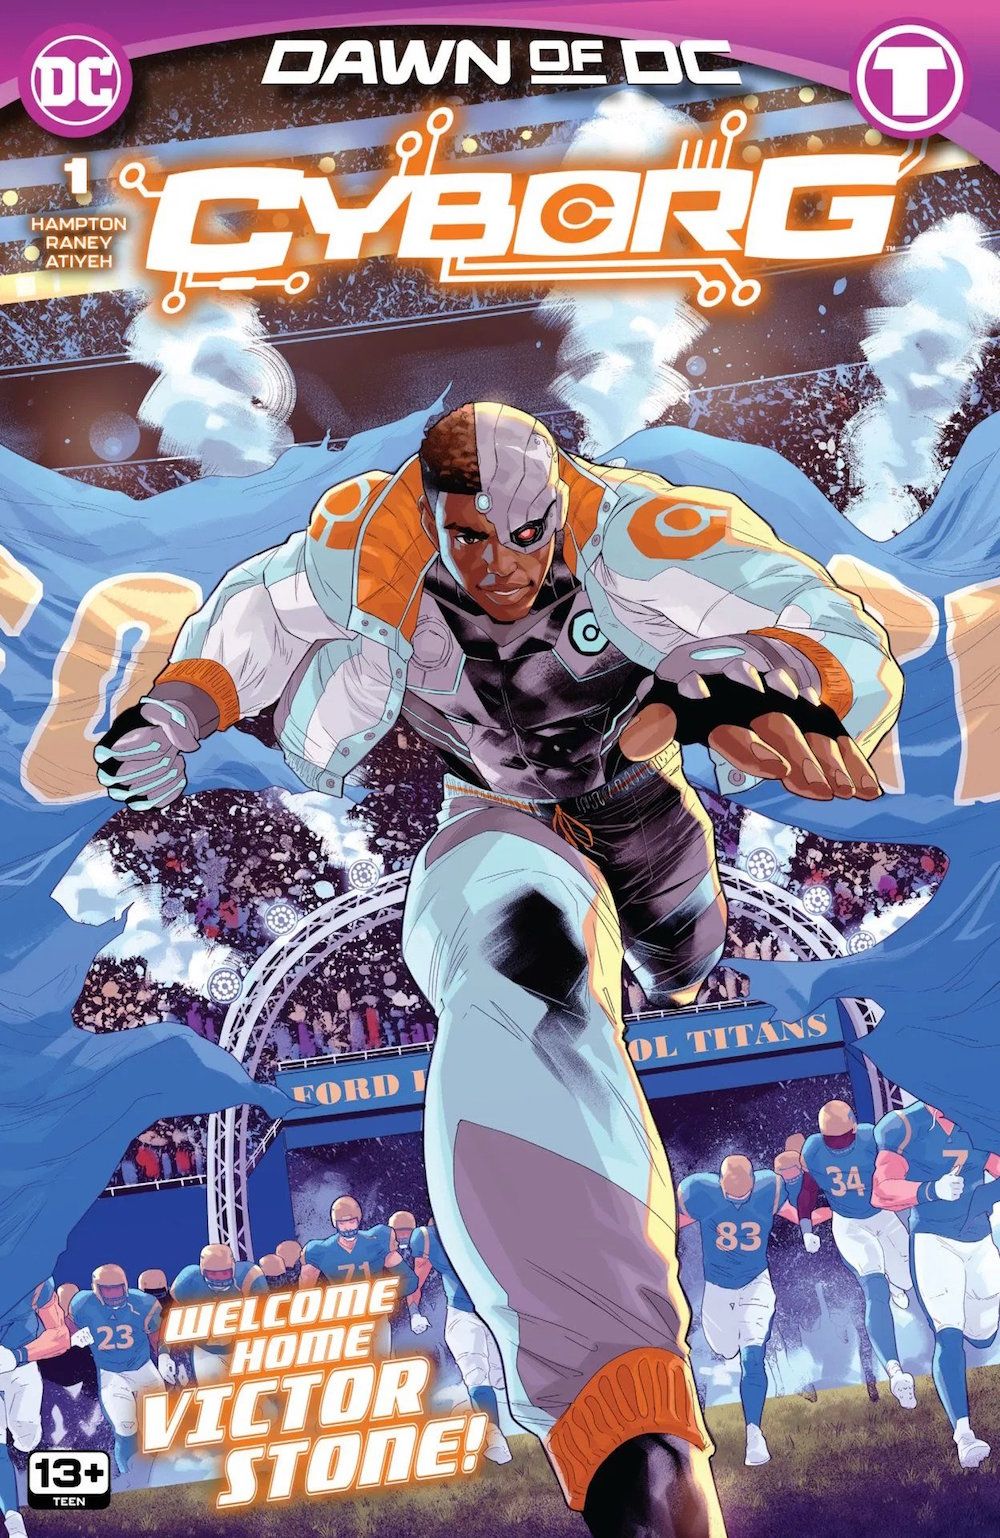 Cyborg runs in front of a soccer team on the cover of Cyborg #1